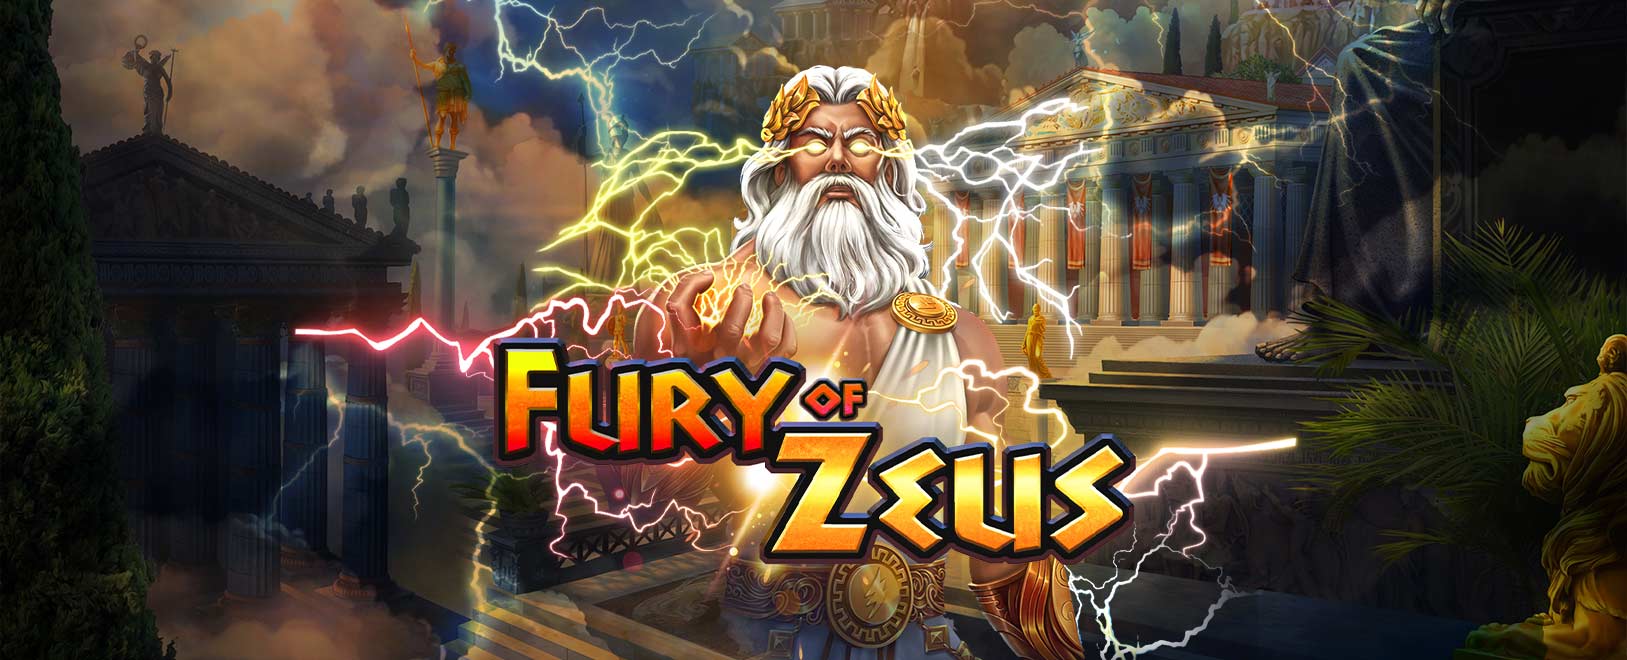 Cafe's January Slot of the Month: Fury of Zeus